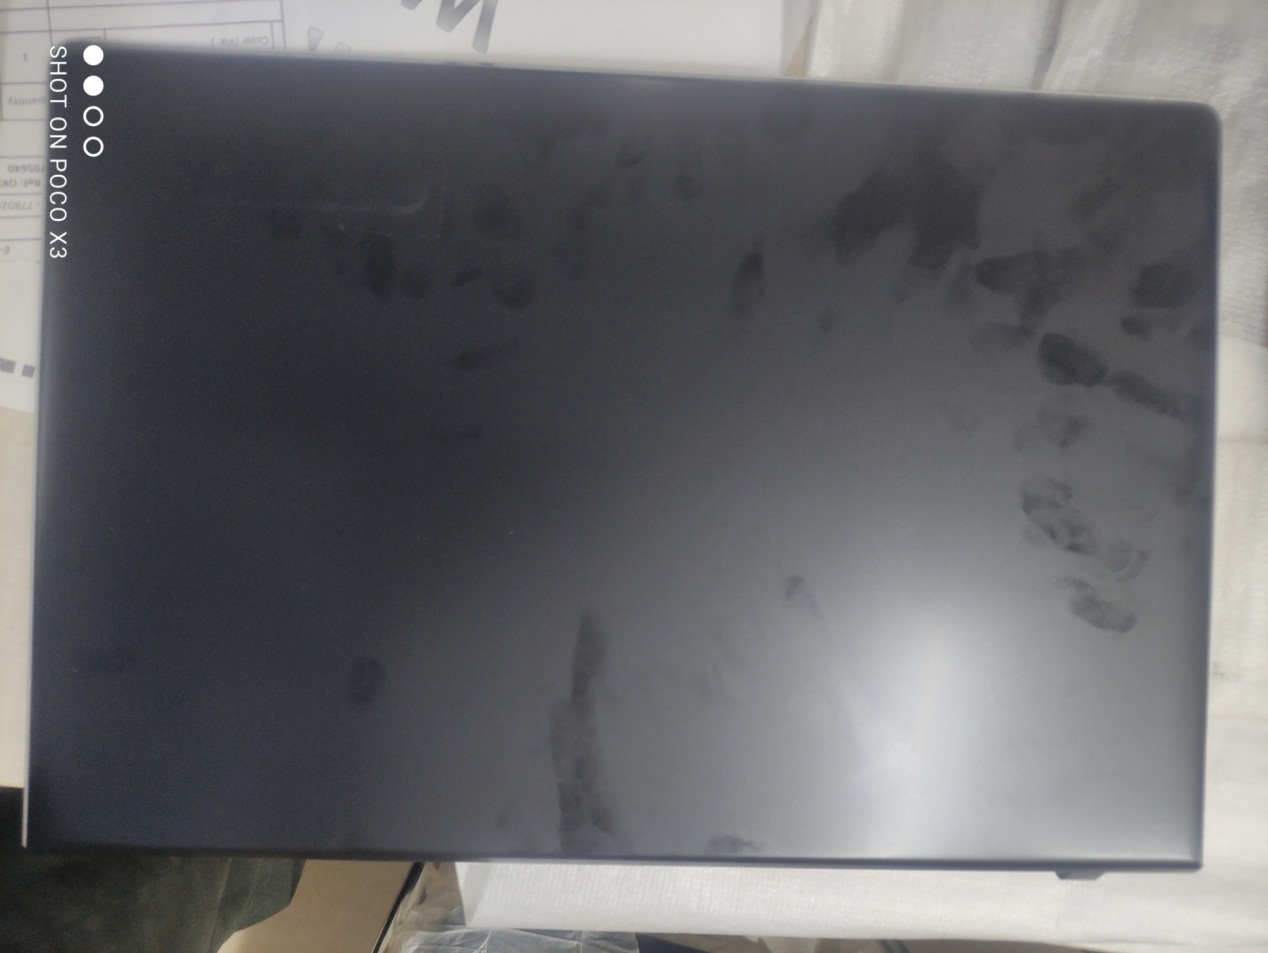 LENOVO IDEAPAD Z51-70 PANEL COVER WITH HINGE